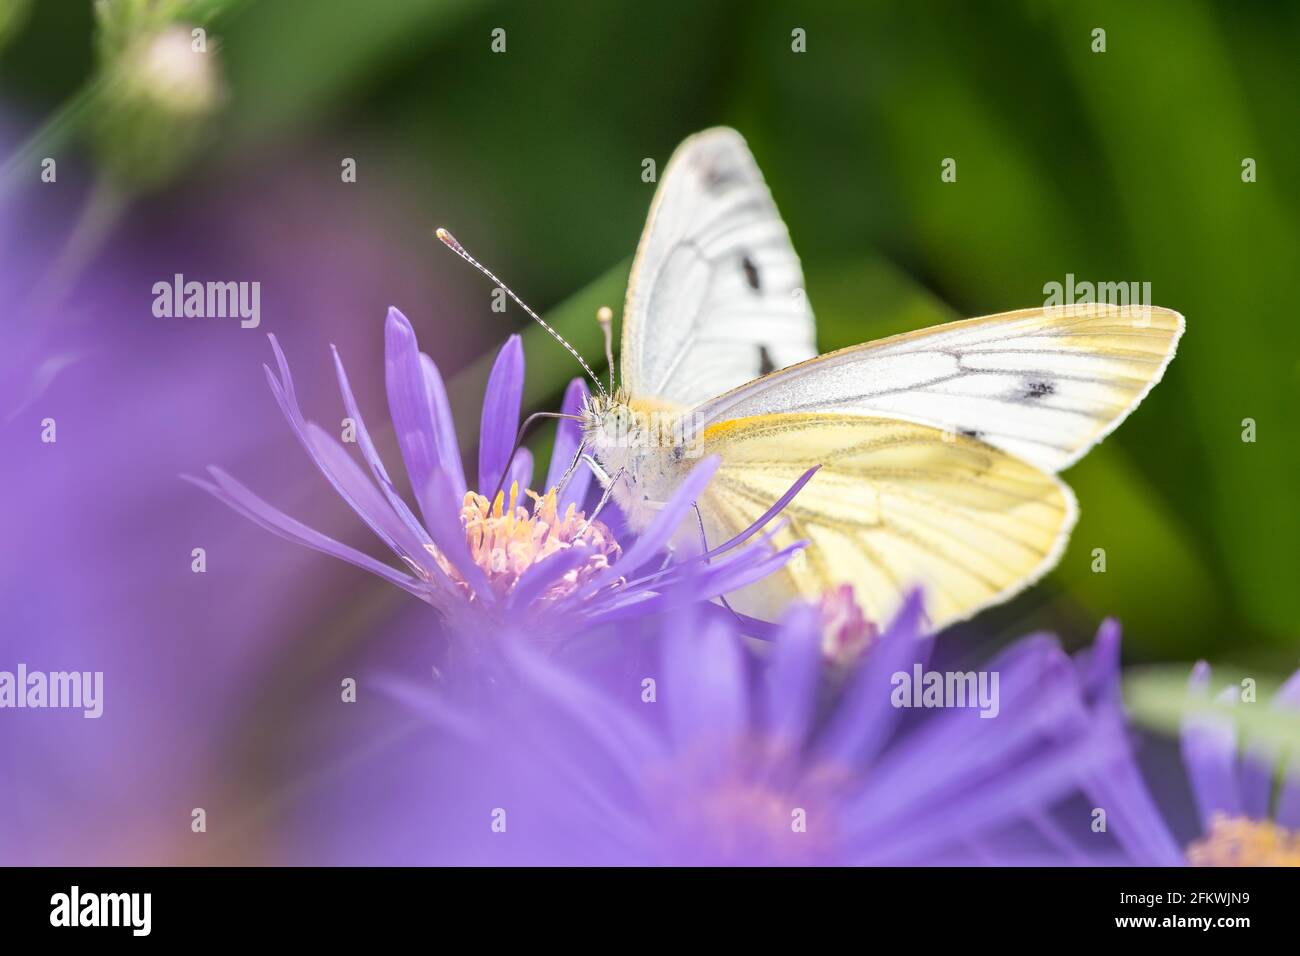 Large White Butterfly Female - Pieris Brassicae - Resting On A Blossom Of The New York Aster - Symphyotrichum Novi-belgii Stock Photo